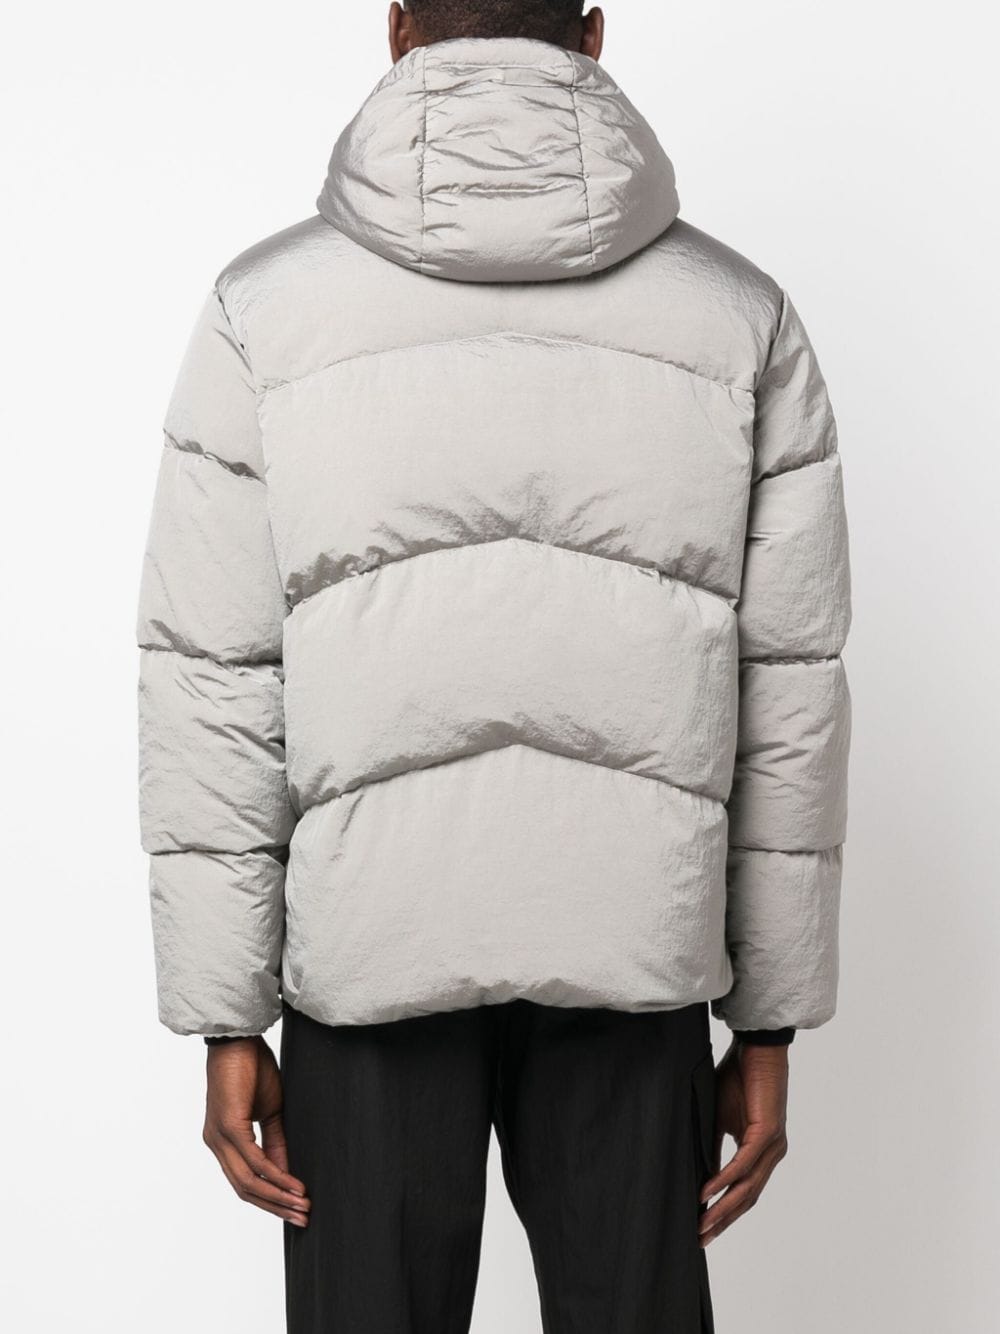 STONE ISLAND Men's Gray Reversible Nylon Down Jacket with Removable Logo Patch